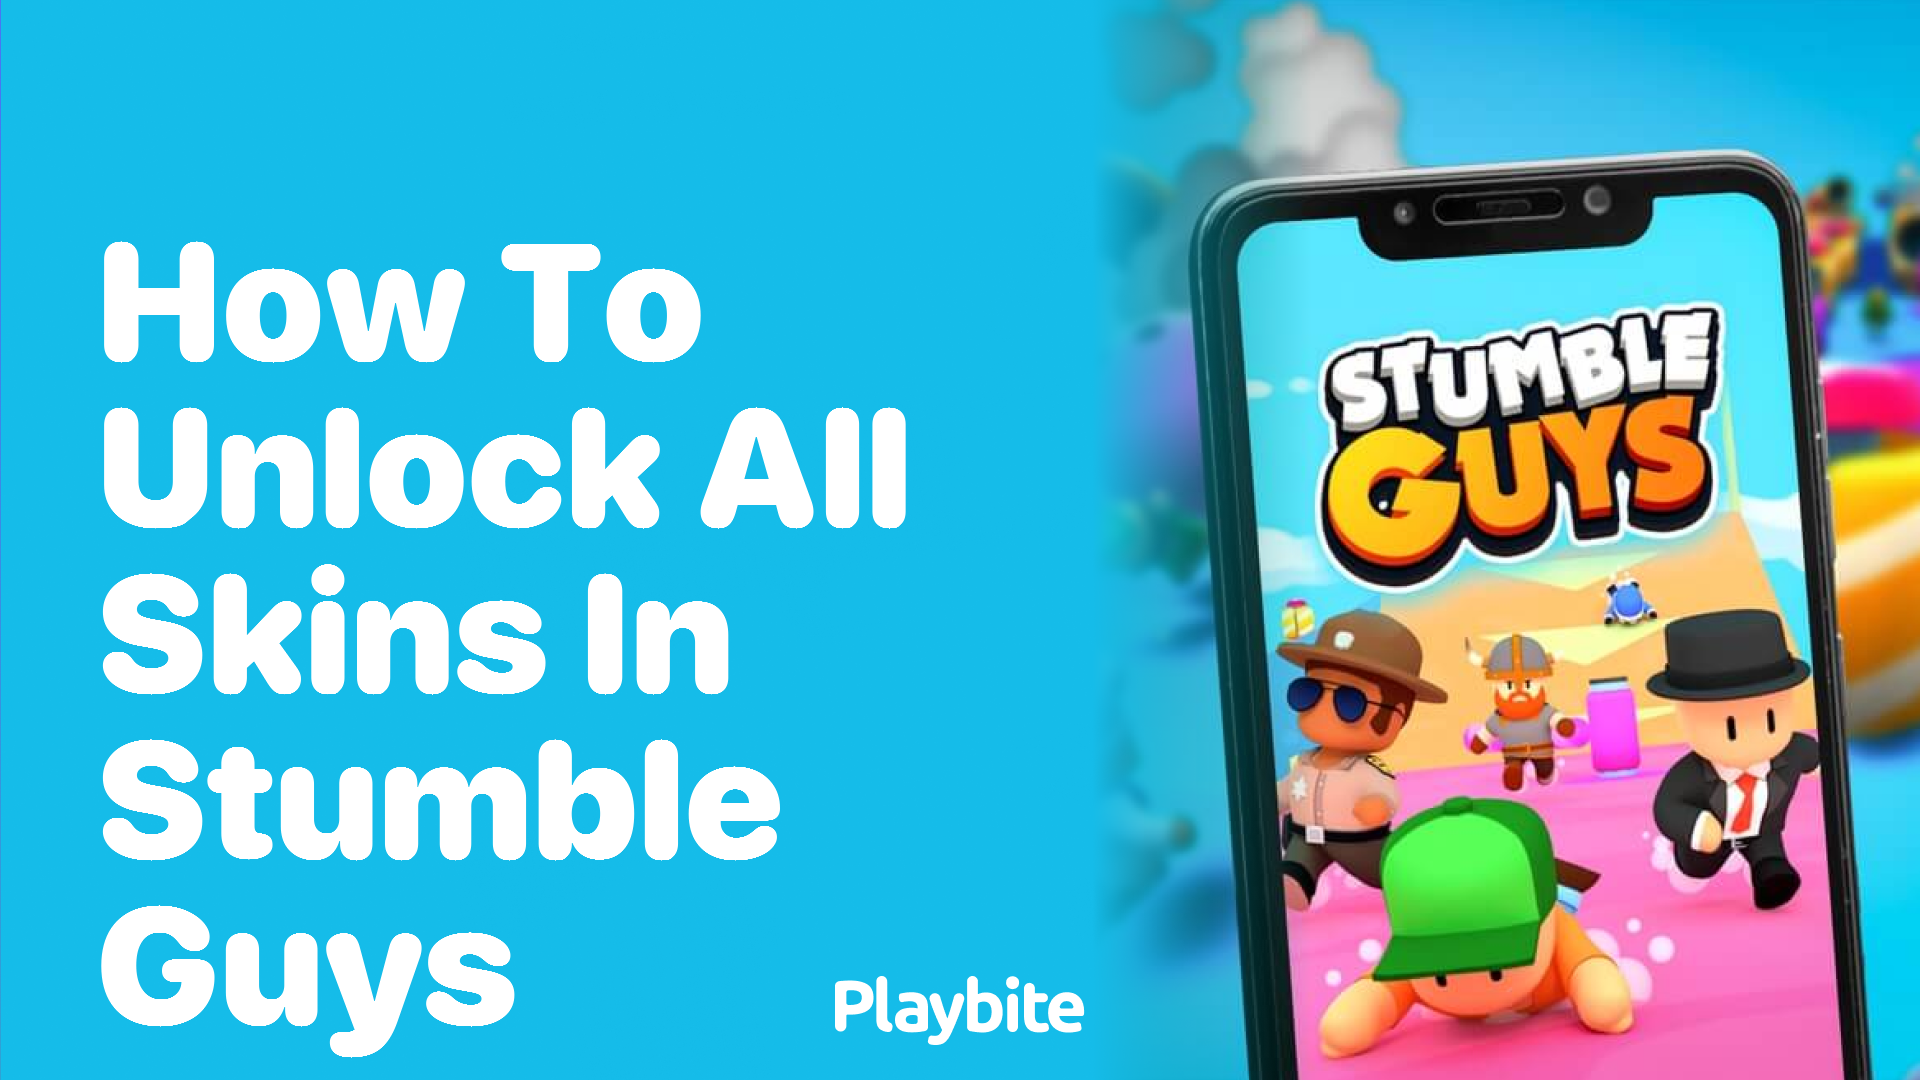 How to Unlock All Skins in Stumble Guys